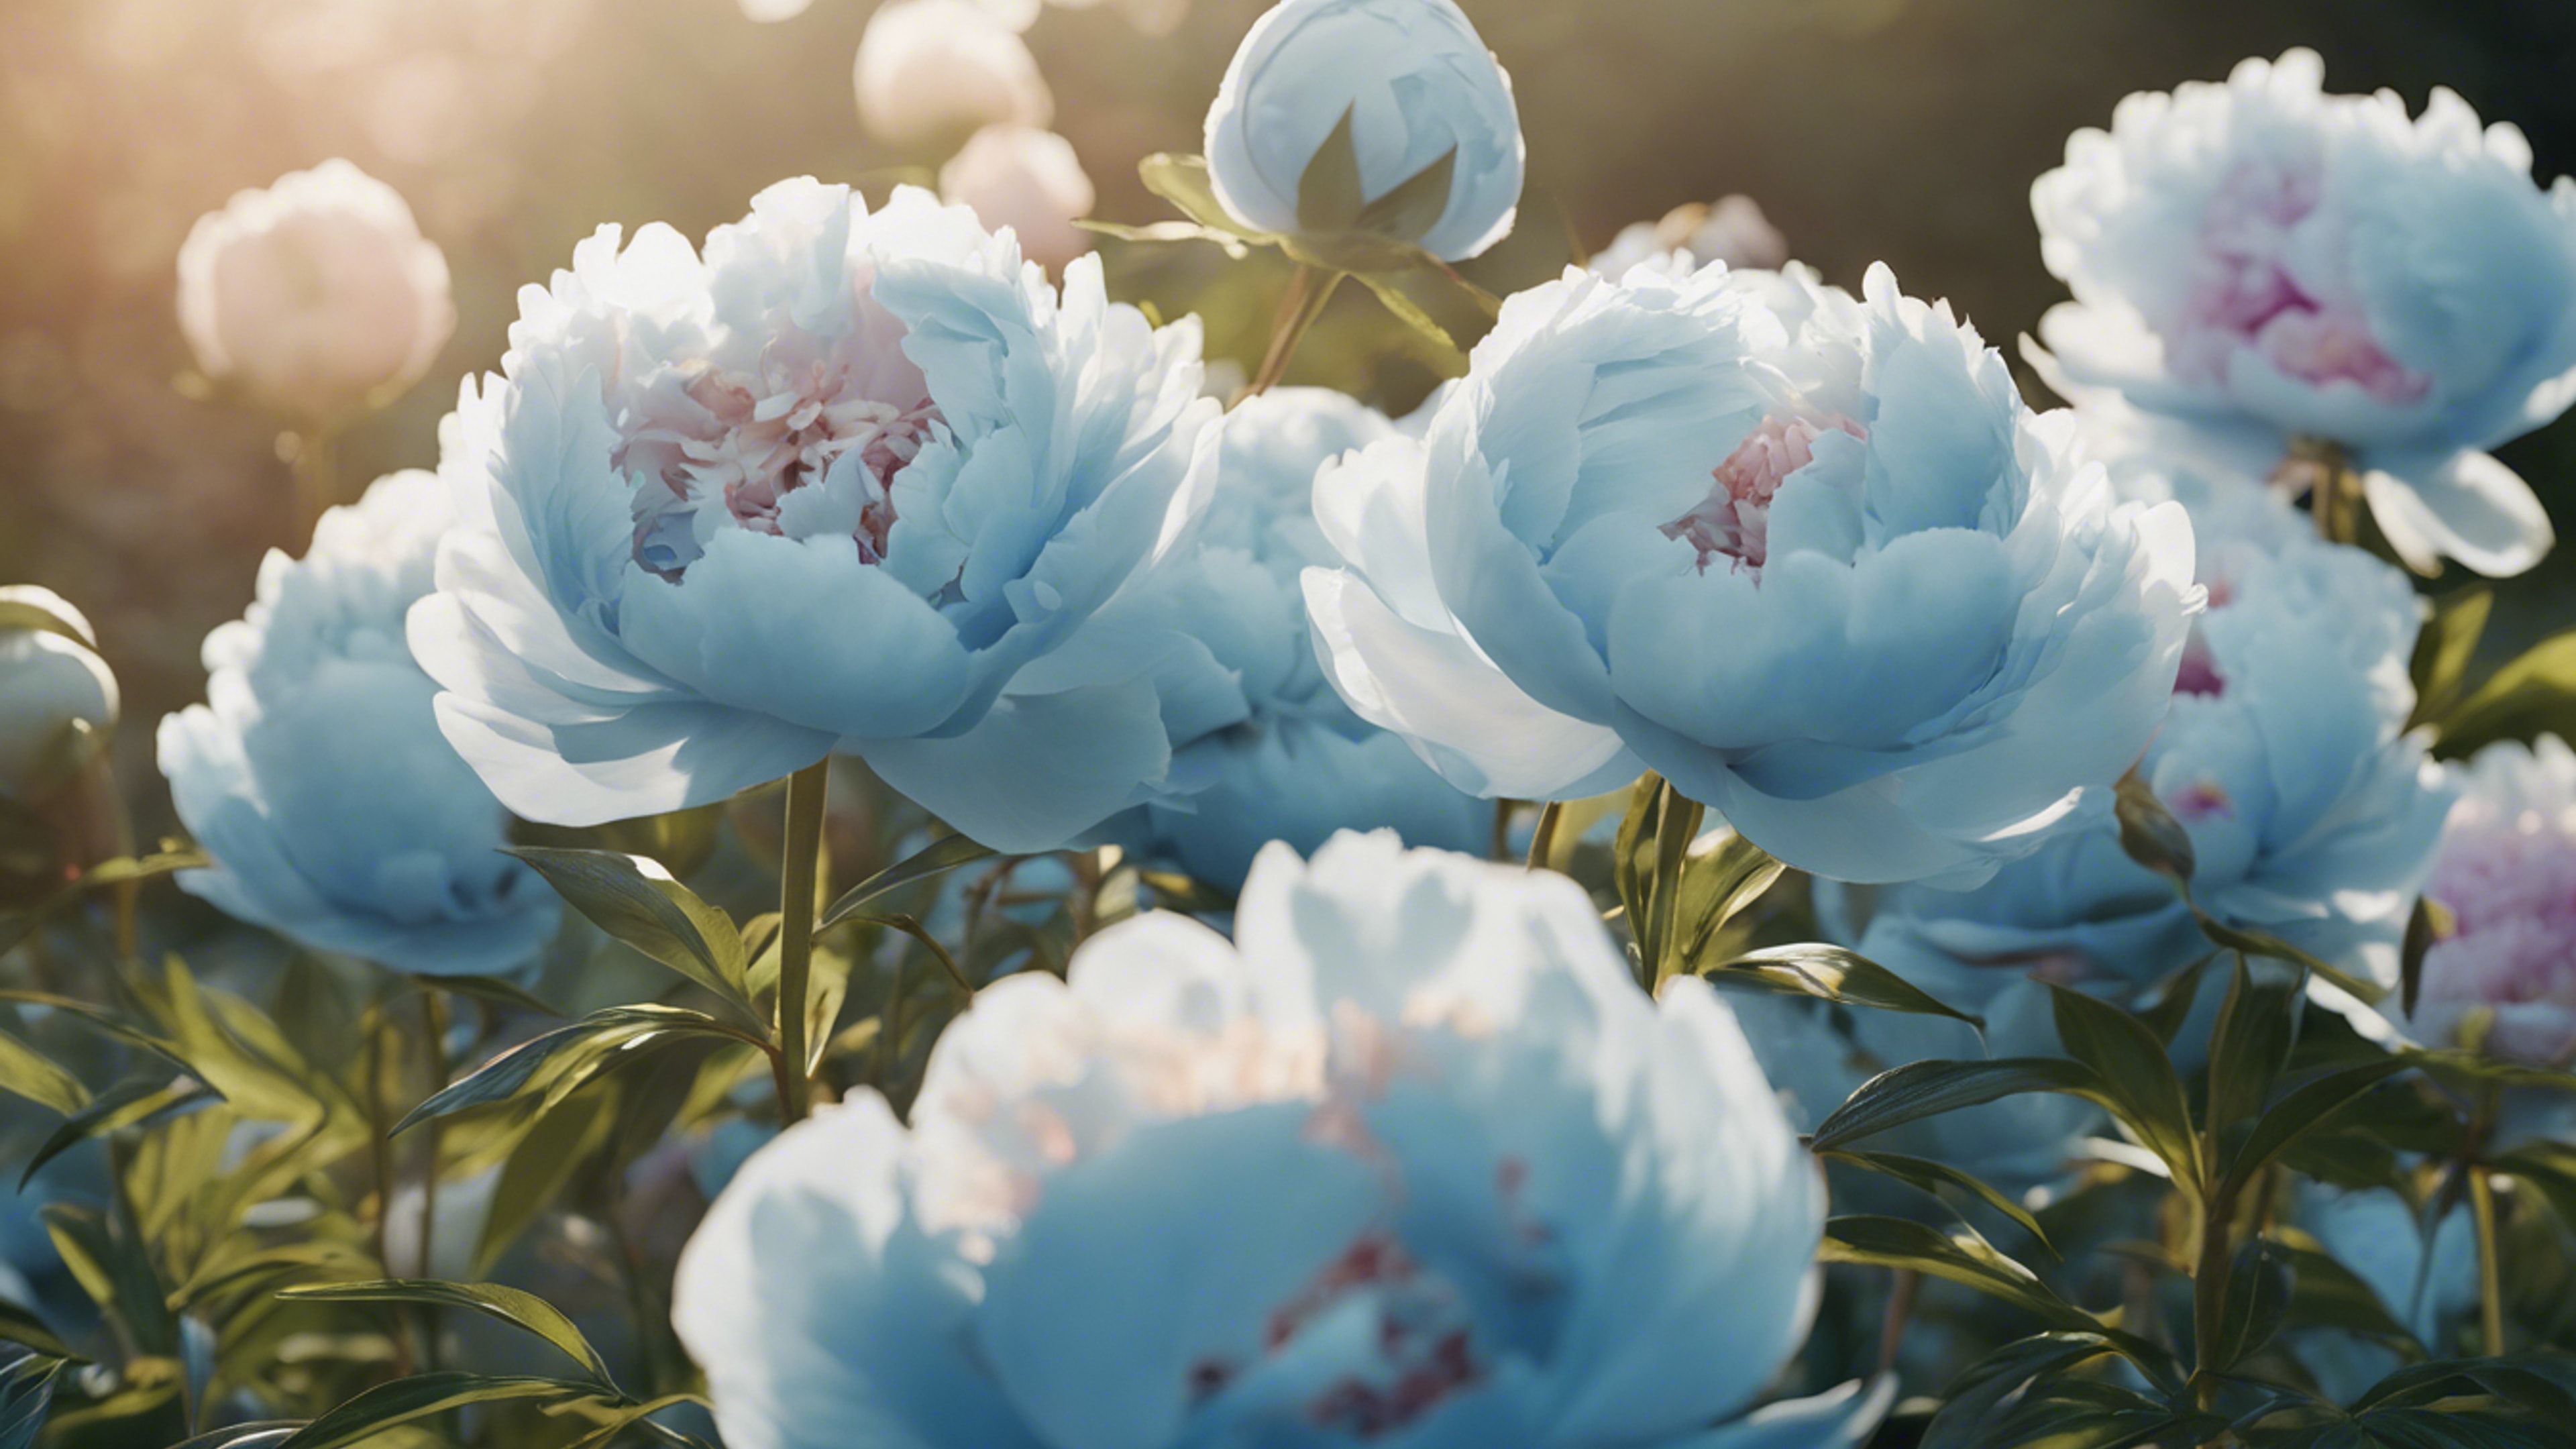 An array of pastel blue peonies blooming in a sunlit garden. Sfondo[bebed2869b0c4244859a]